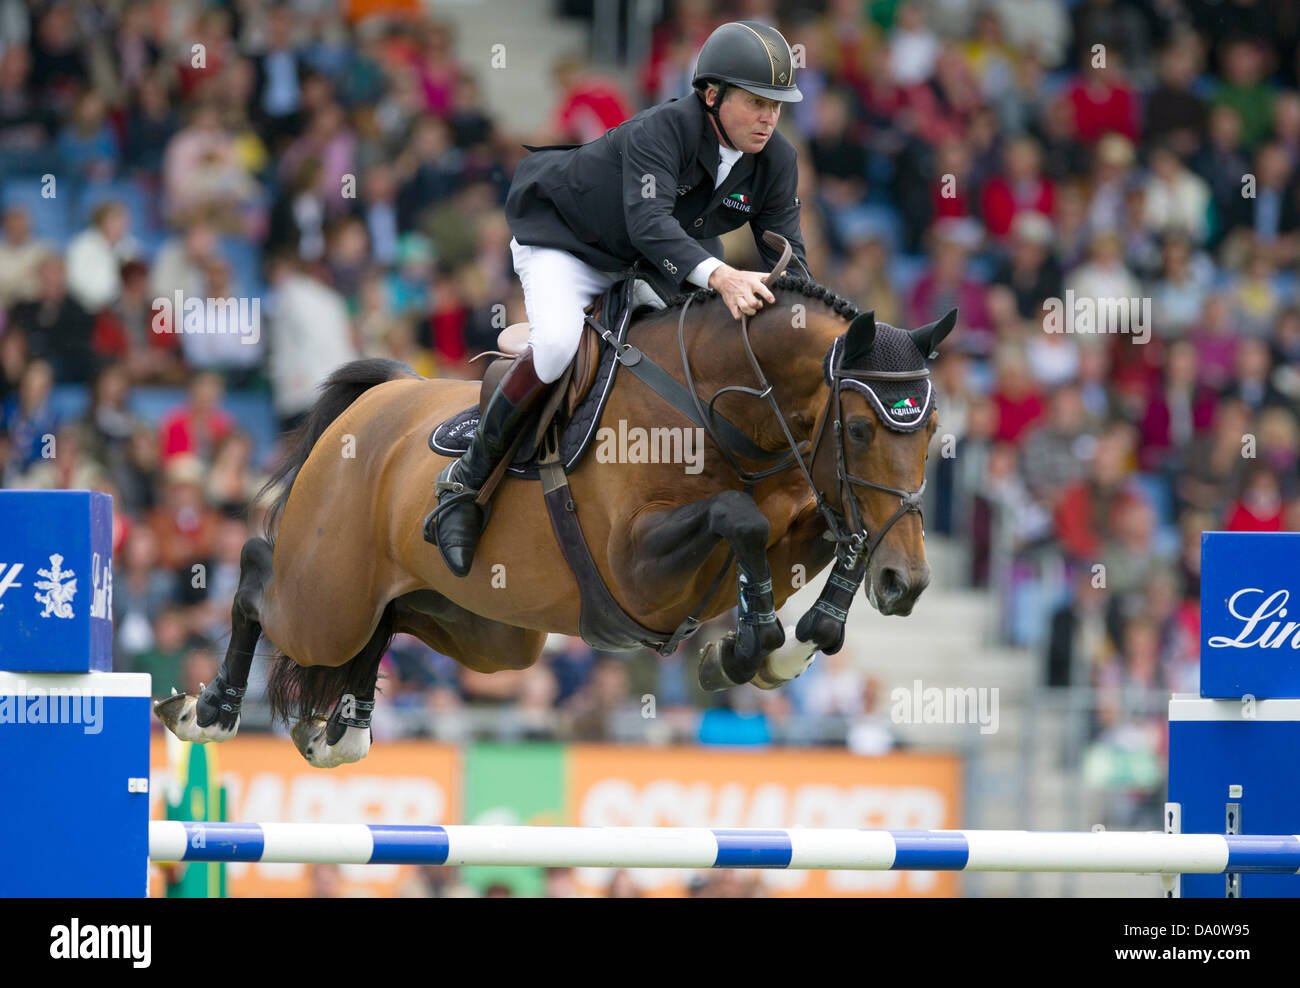 British show jumper Nick Skelton on his horse Big Star in action during the Showjumping Grand Prix at the International Horse Show CHIO in Aachen, Germany, 30 June 2013. Photo: UWE ANSPACH Stock Photo